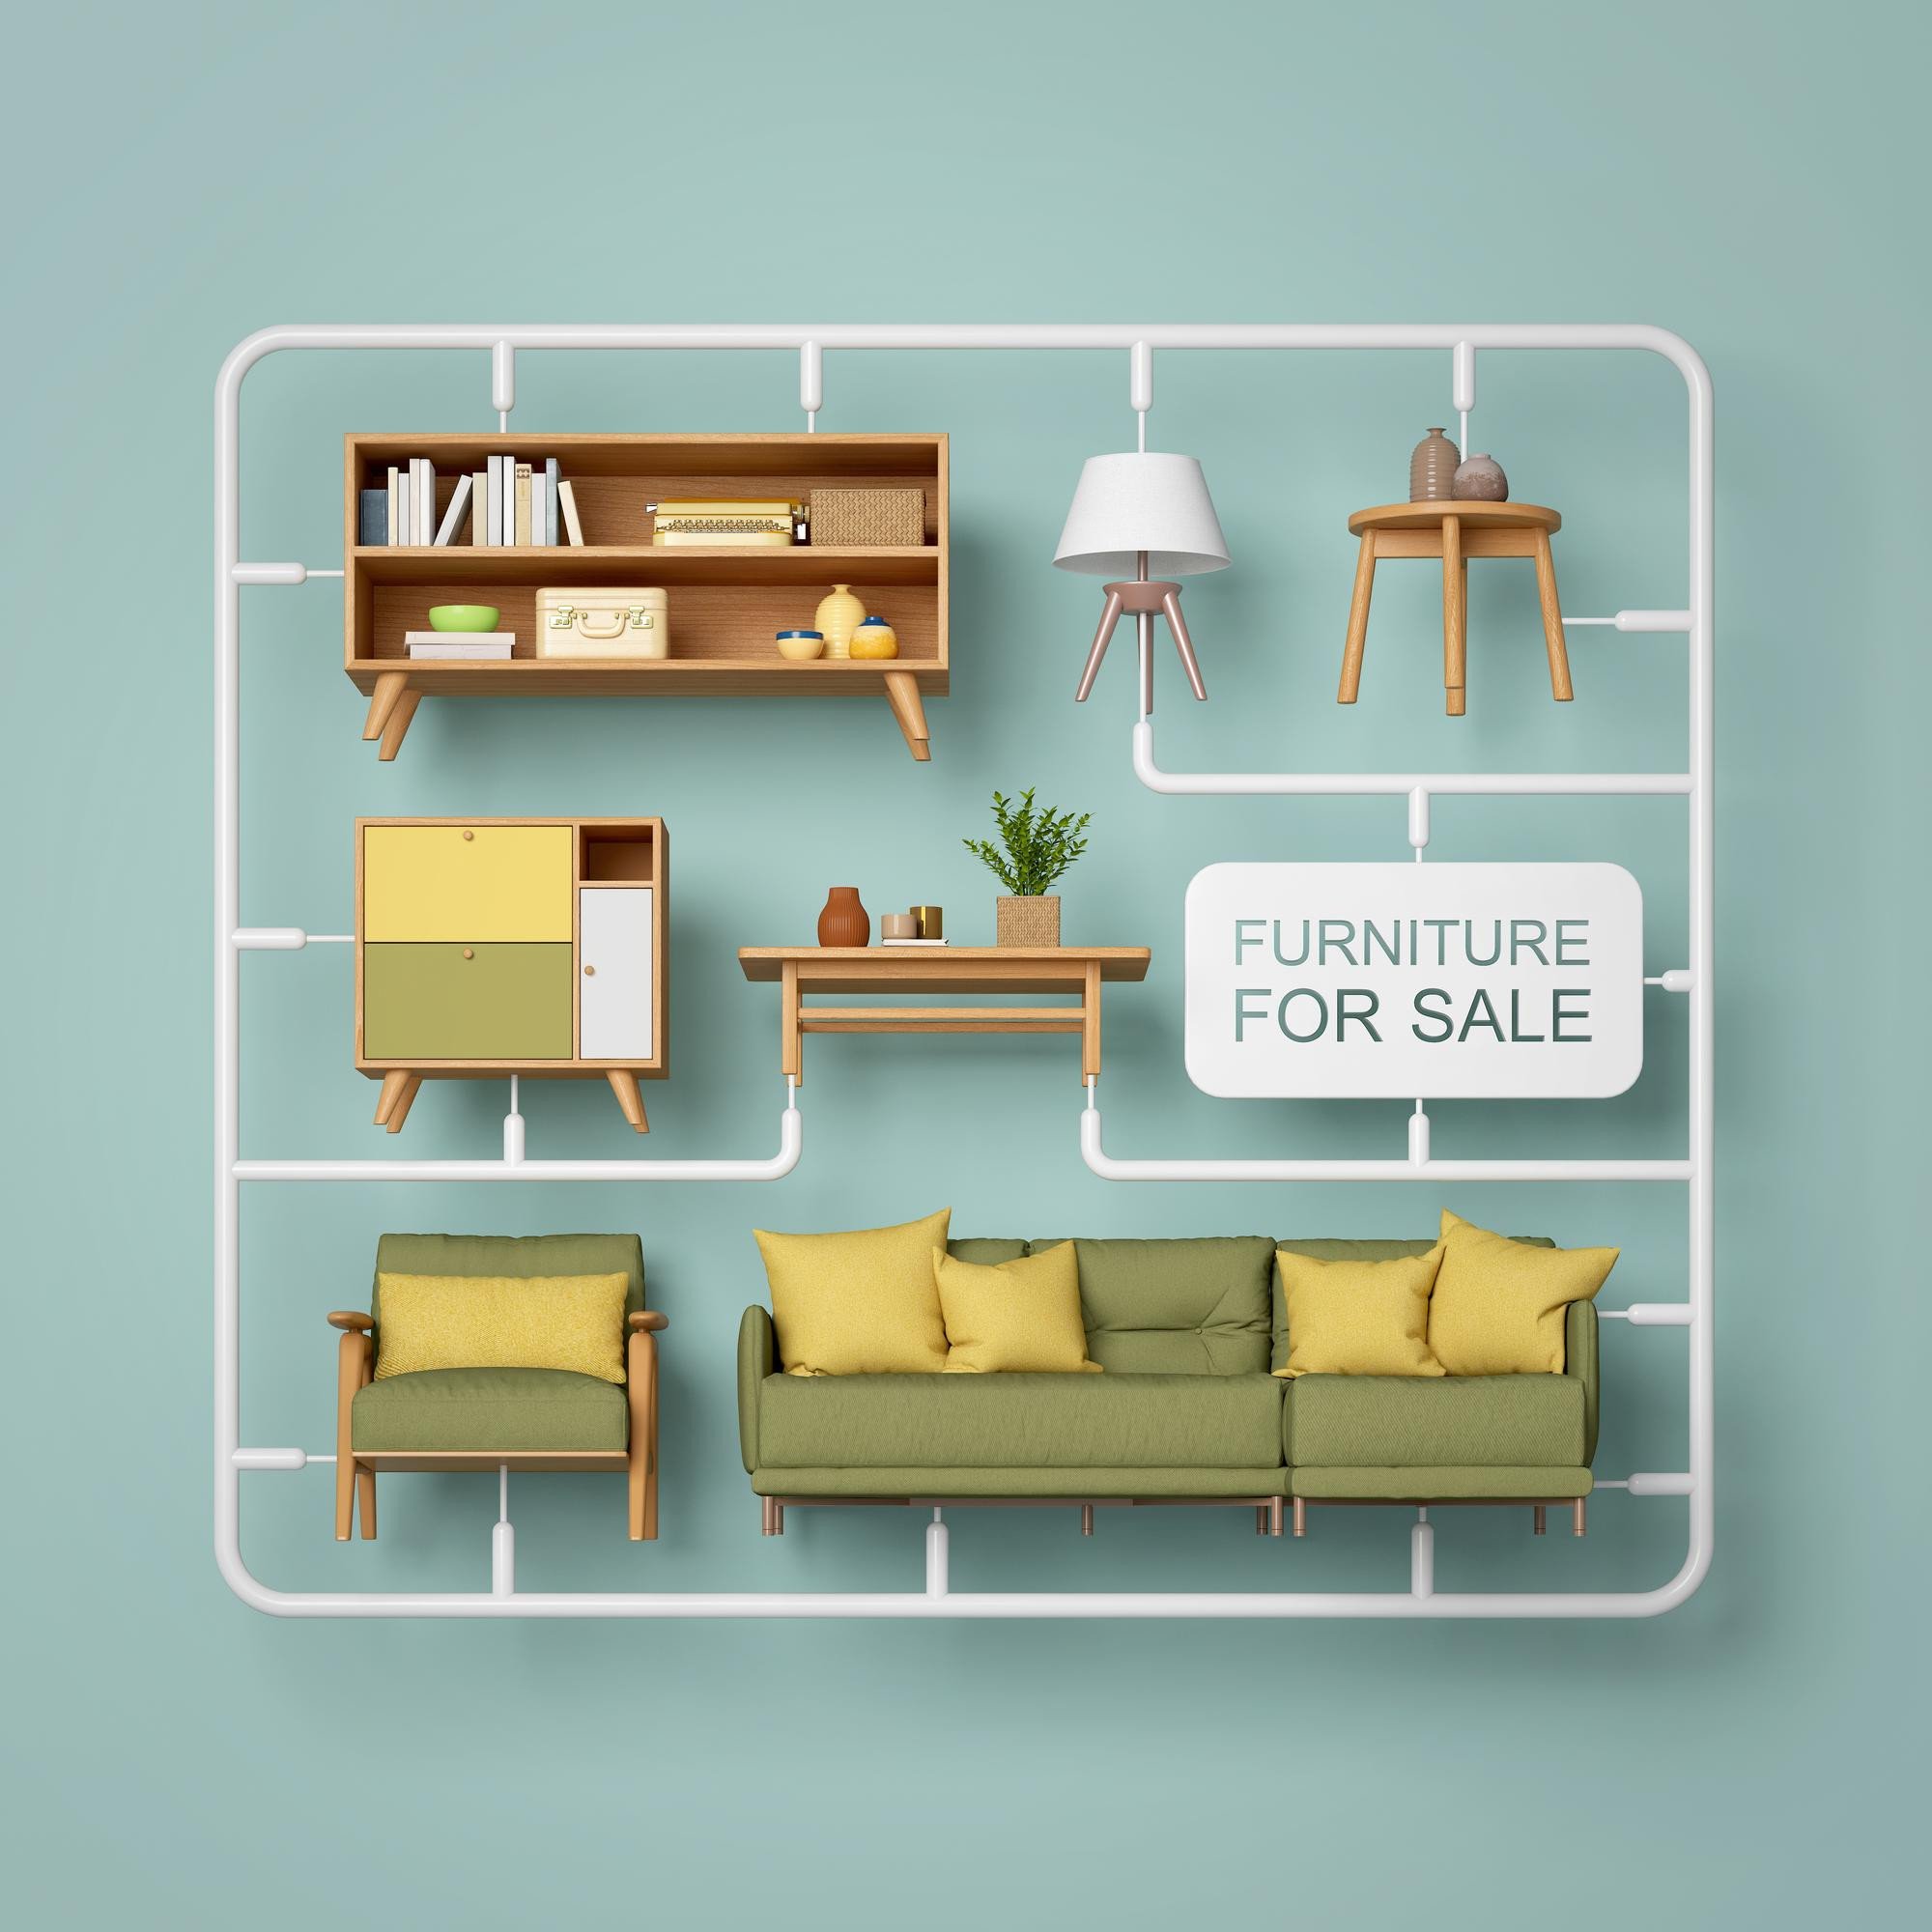 How To Create a Marketplace For Furniture?